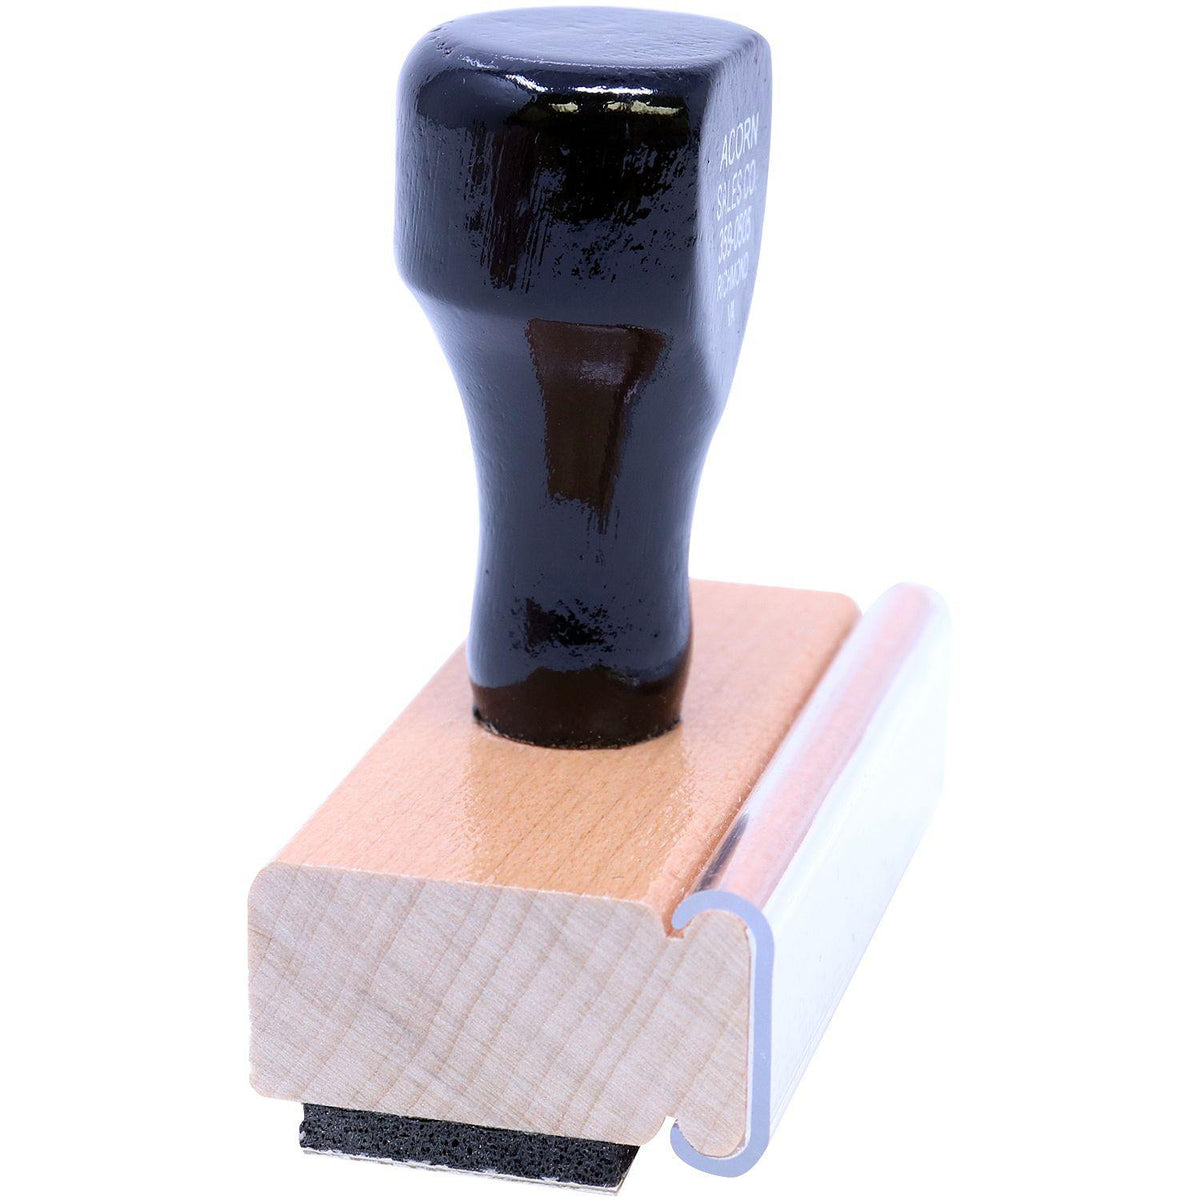 Side View of Large Duplicado Rubber Stamp at an Angle